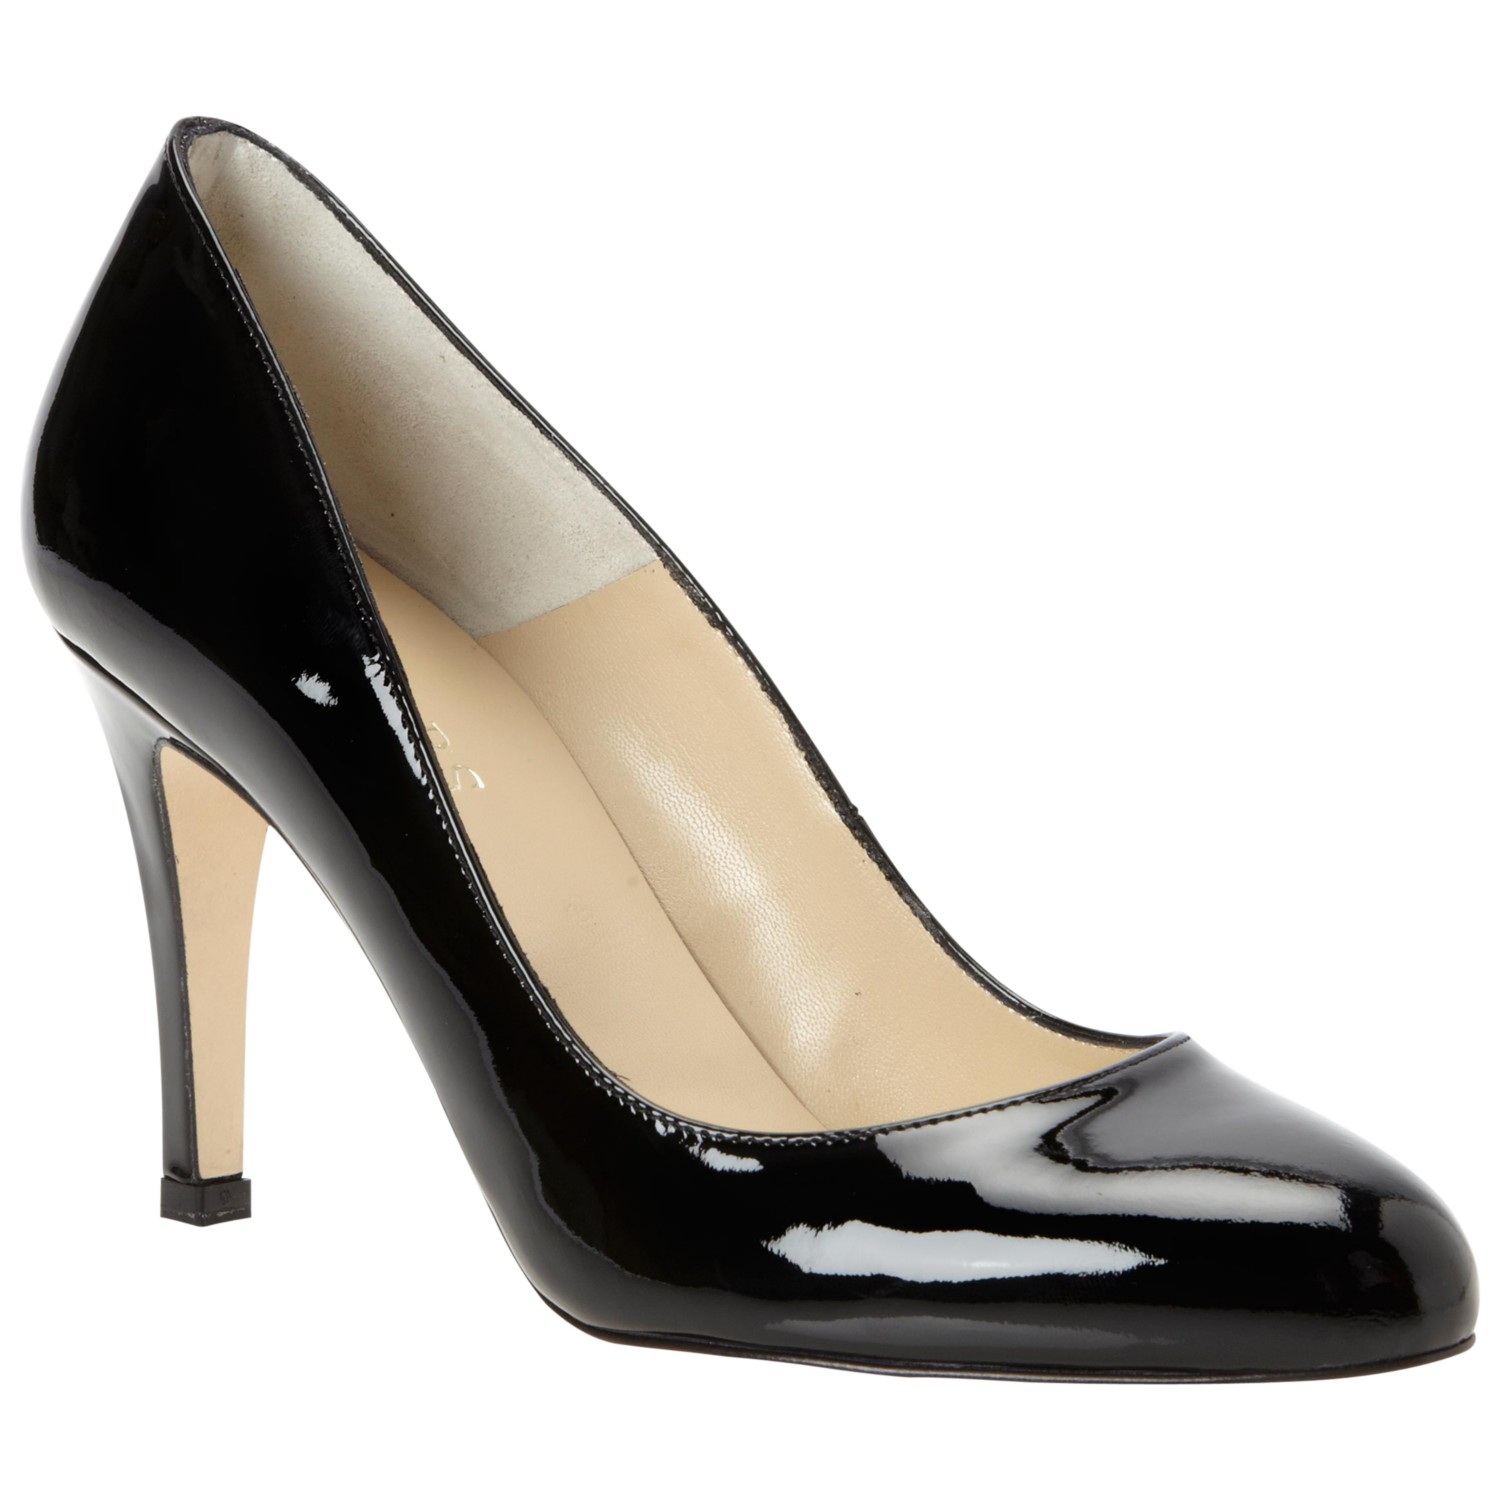 Hobbs Rebecca Patent Leather Almond Toe Court Shoes in Black | Lyst